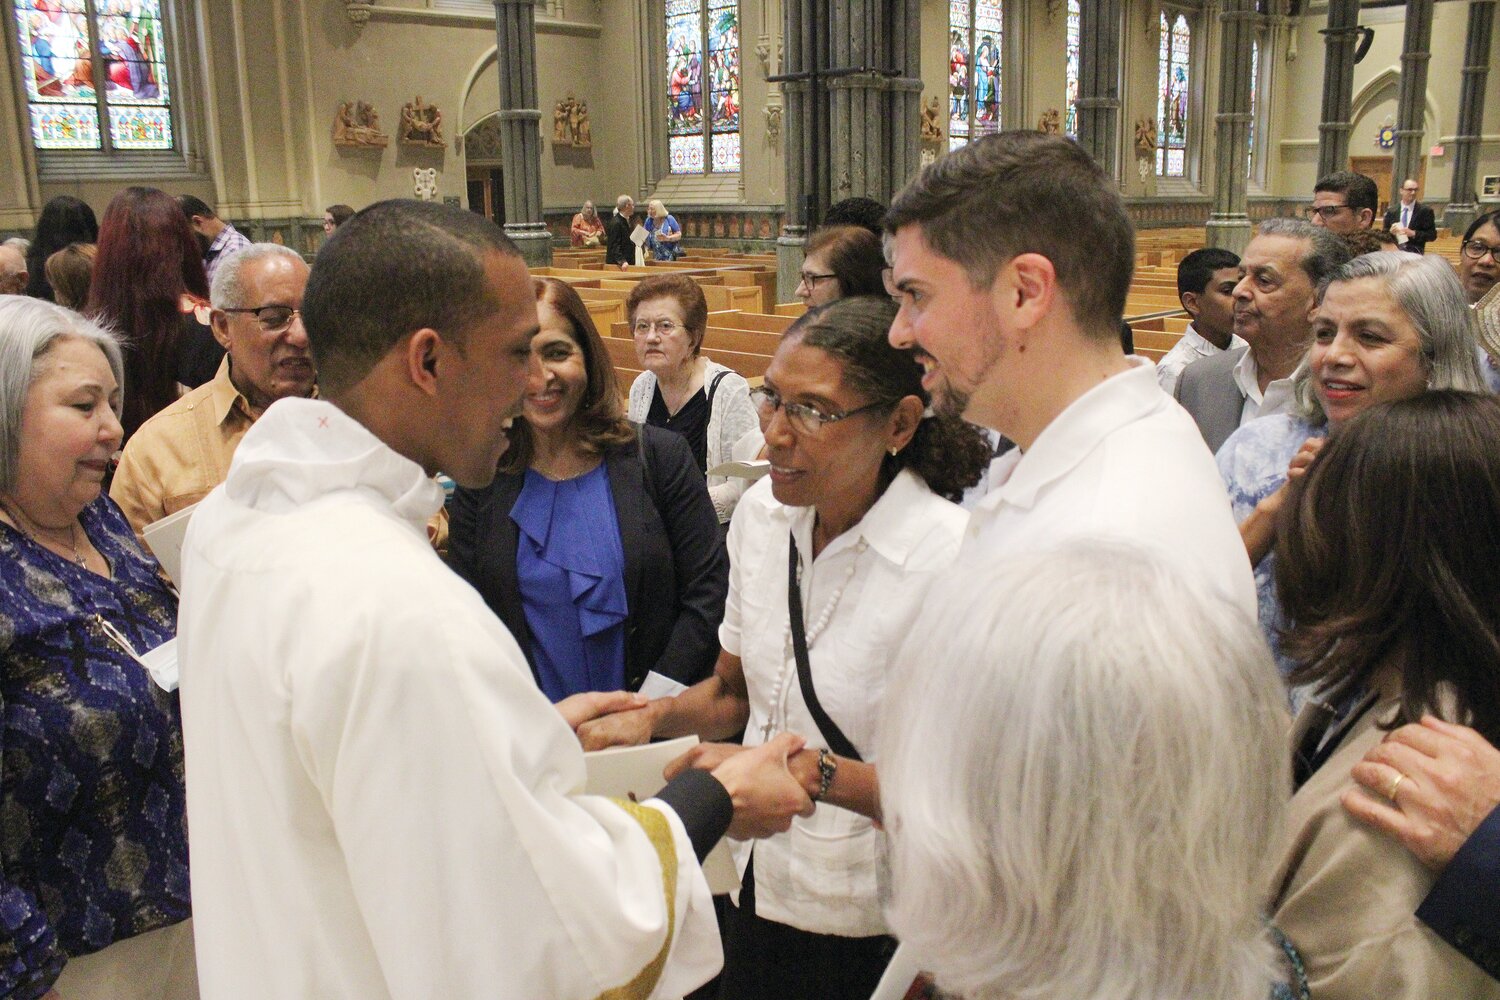 Deacon Olmos Rivera greets those who attended the Mass celebrating his ordination to the transitional diaconate.